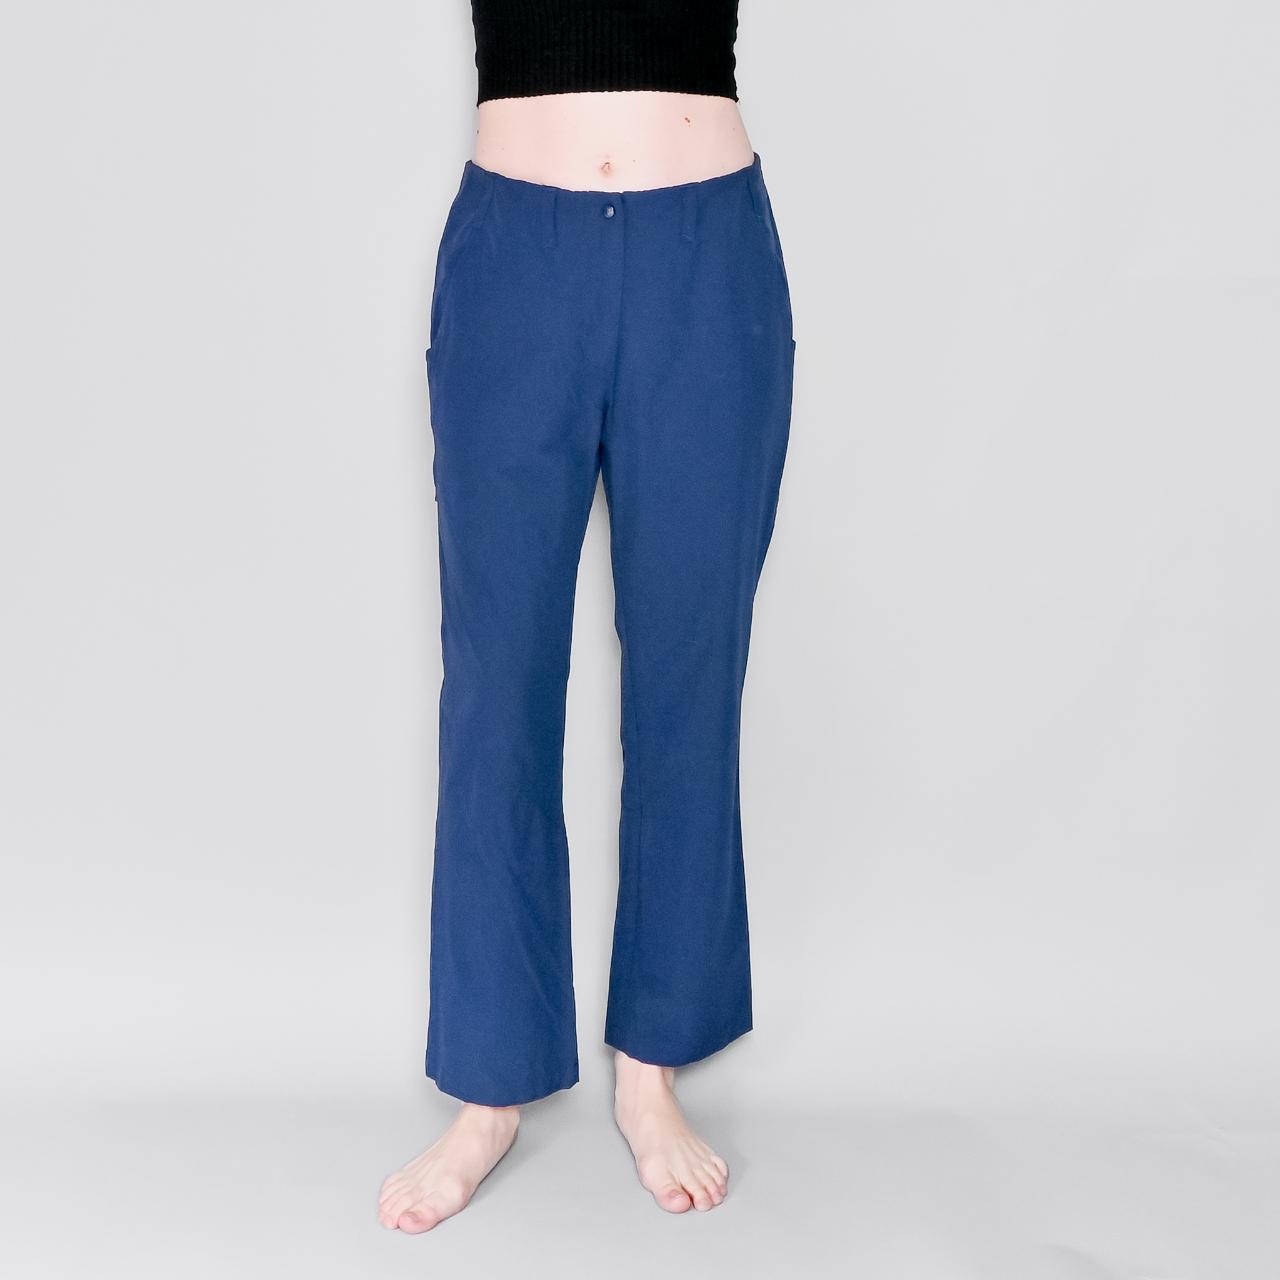 Details more than 100 rohan womens trousers best